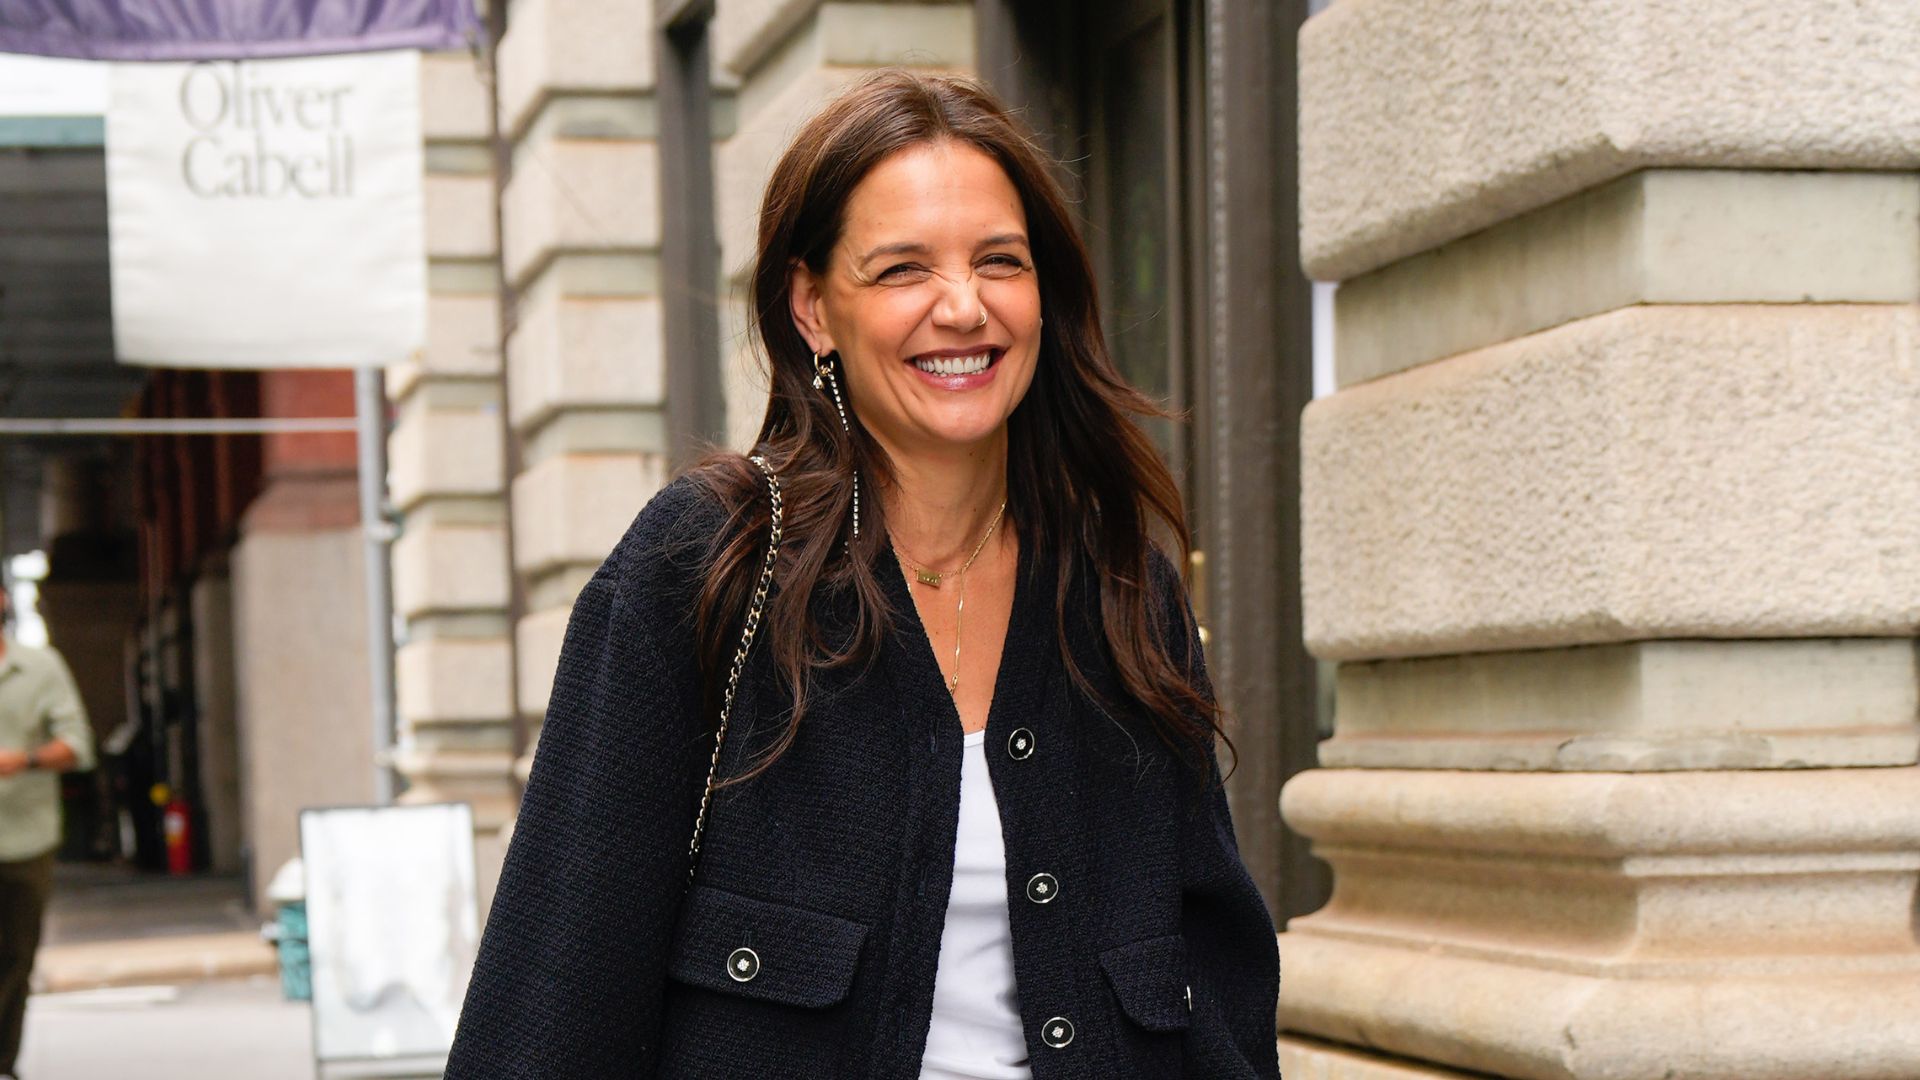 Katie Holmes's Chanel Bag Is A Classic Investment Piece